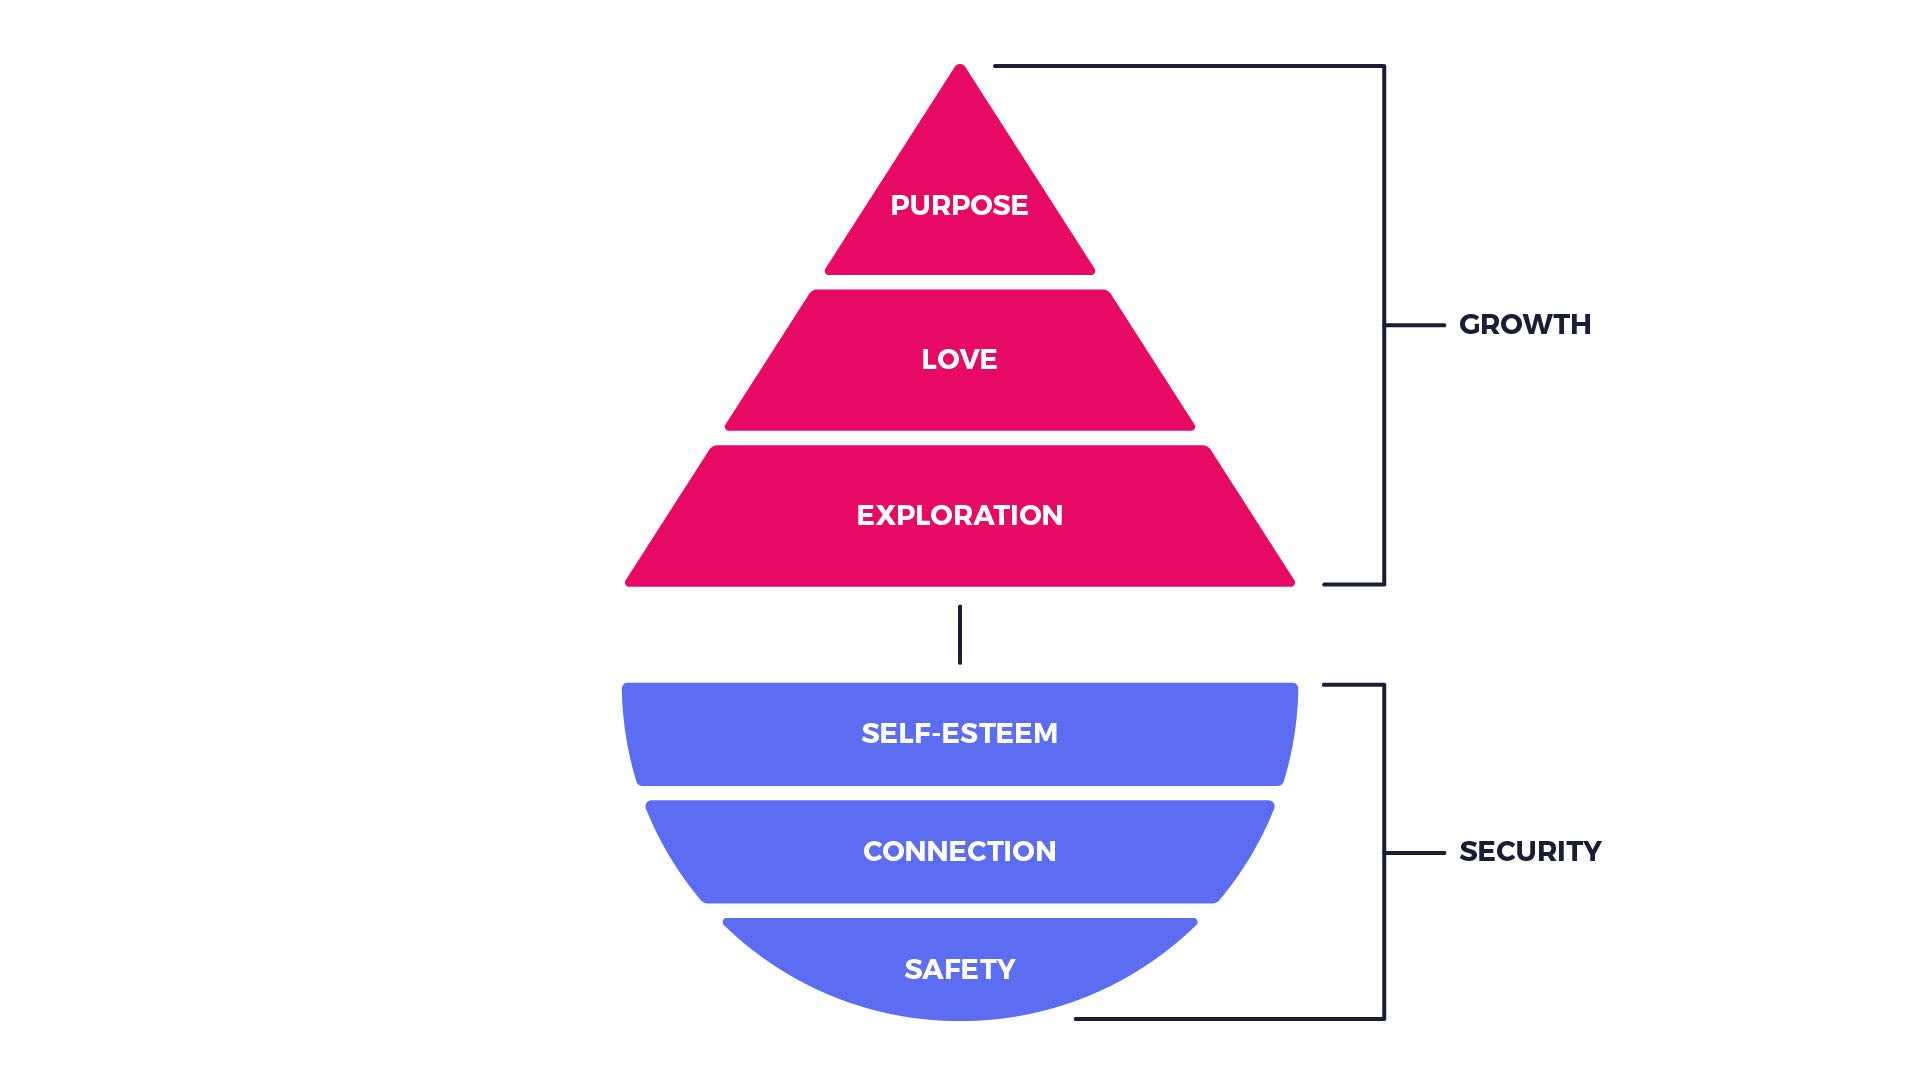 Maslow's Pyramid of needs reworked as a boat.